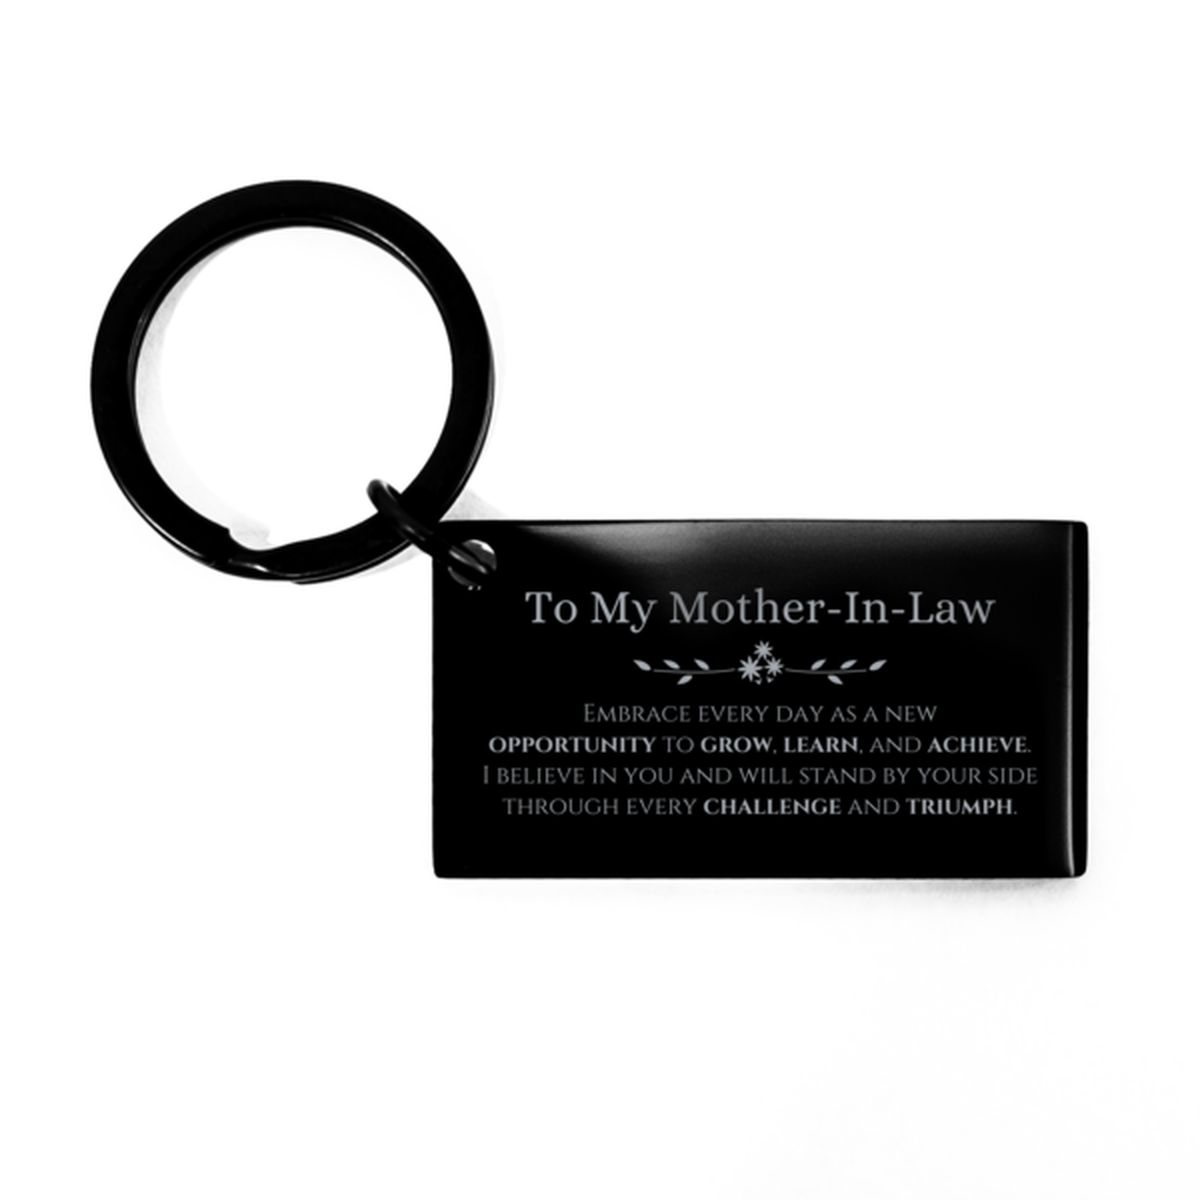 To My Mother-In-Law Gifts, I believe in you and will stand by your side, Inspirational Keychain For Mother-In-Law, Birthday Christmas Motivational Mother-In-Law Gifts